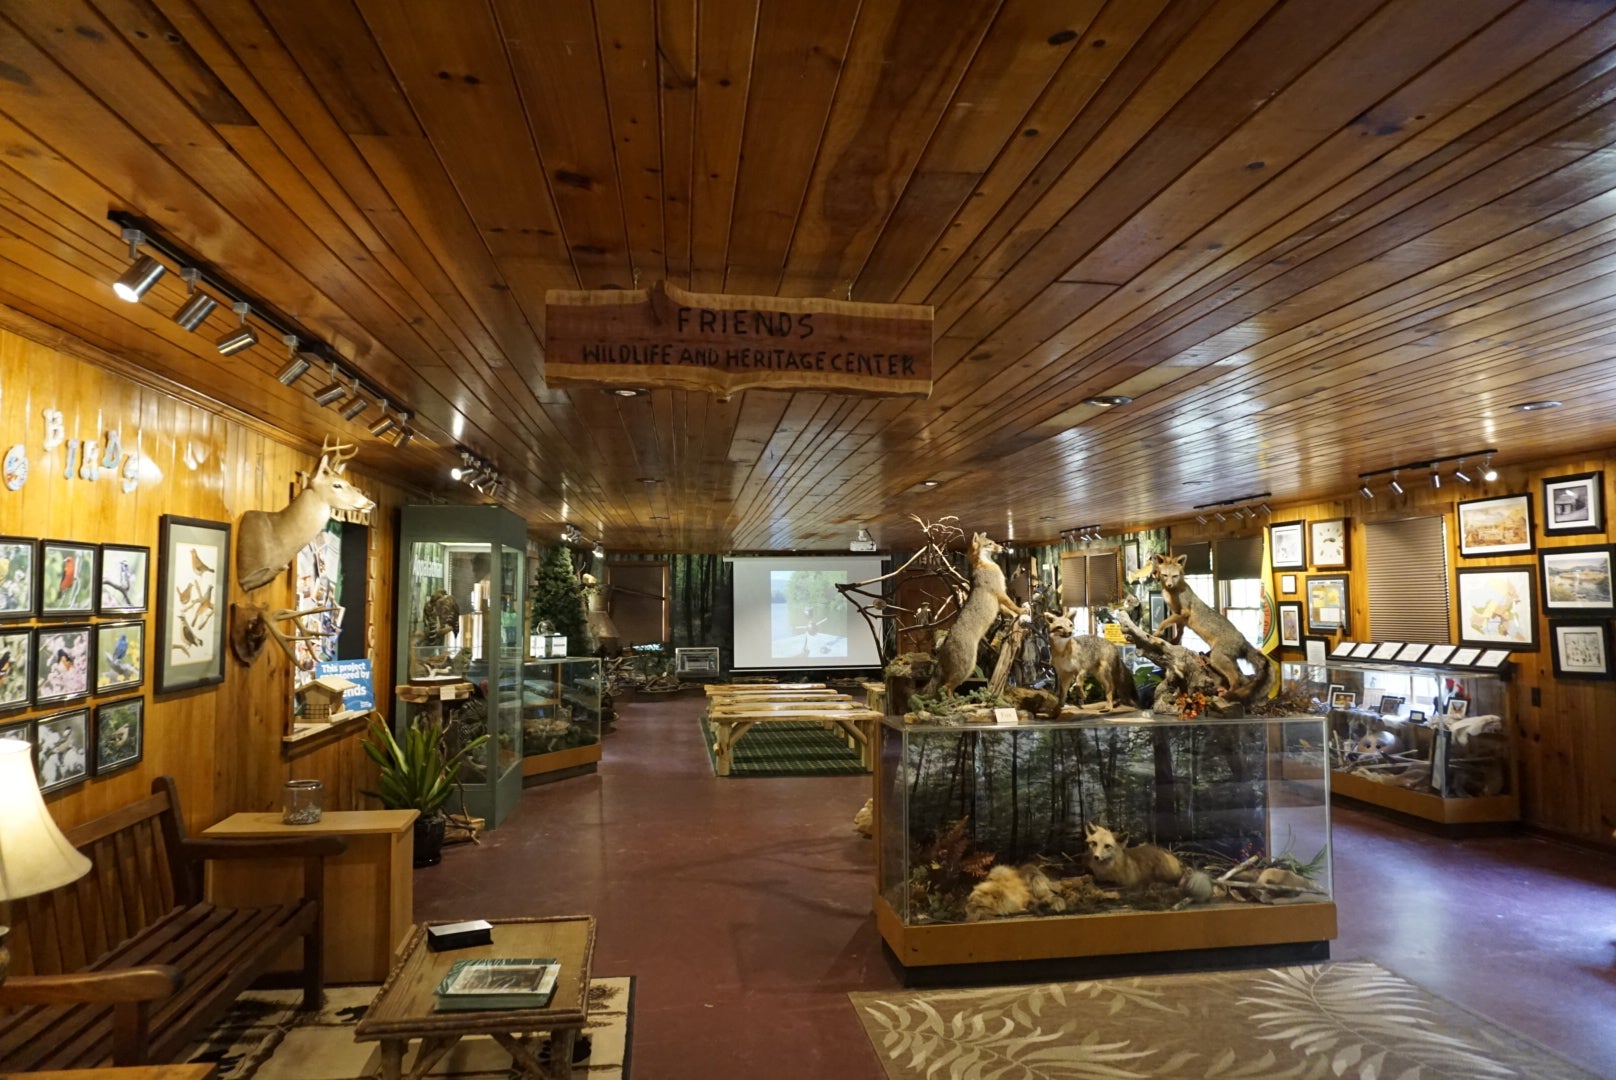 Inside the visitors center which has an educational exhibit